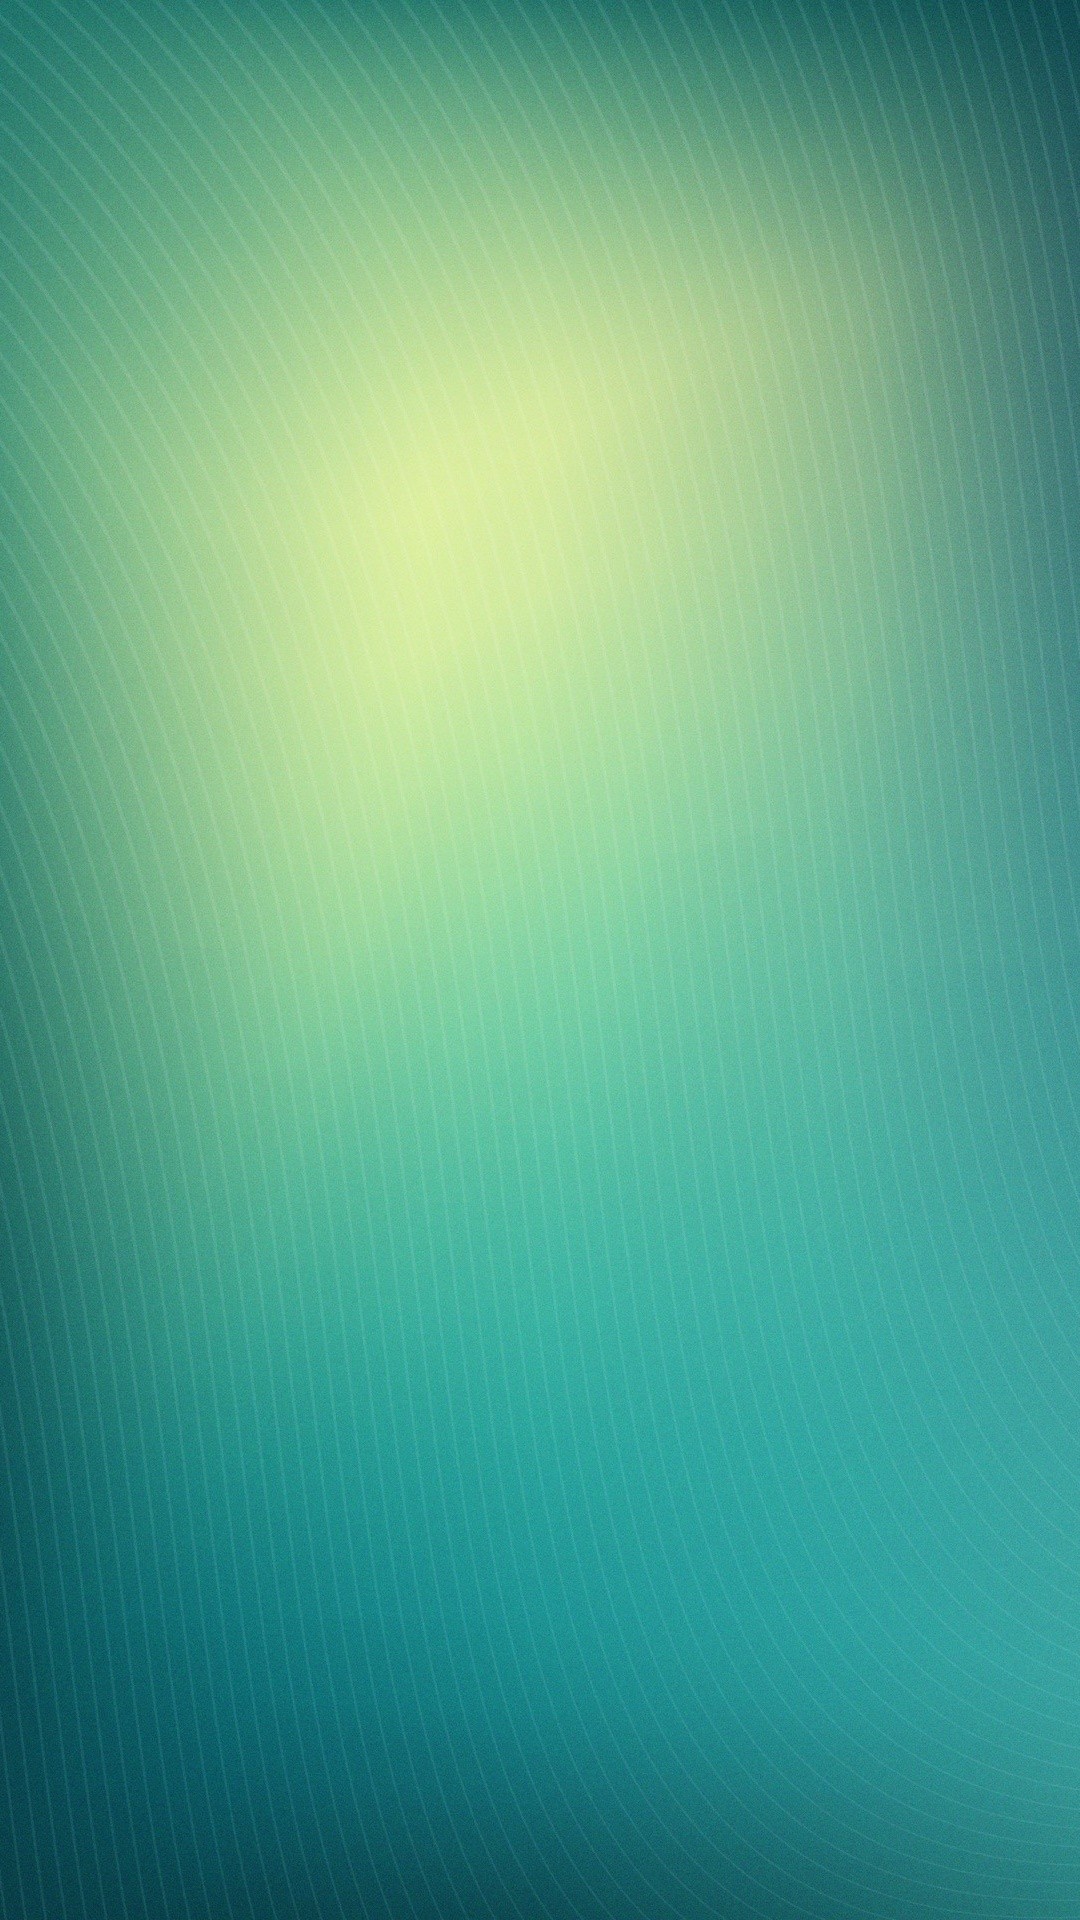 1080x1920 Green gradient. 18 Calming blurred lights and gradients wallpapers for  iPhone - @mobile9